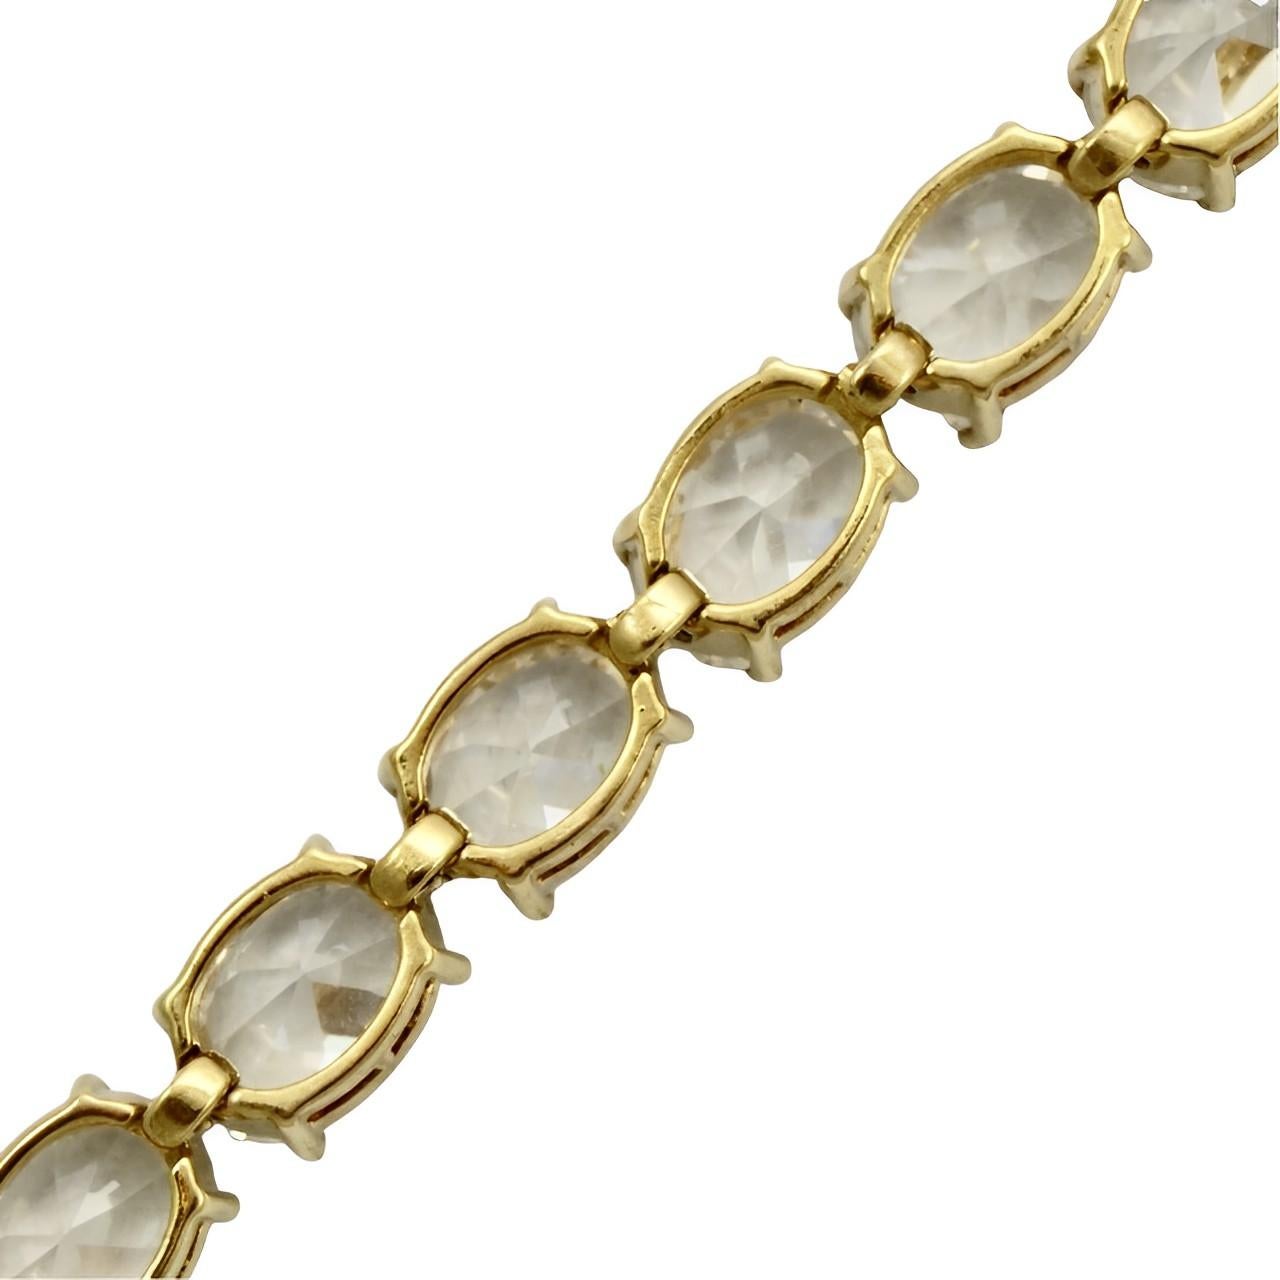 Women's or Men's Monet Gold Plated and Large Clear Oval Rhinestone Link Bracelet For Sale